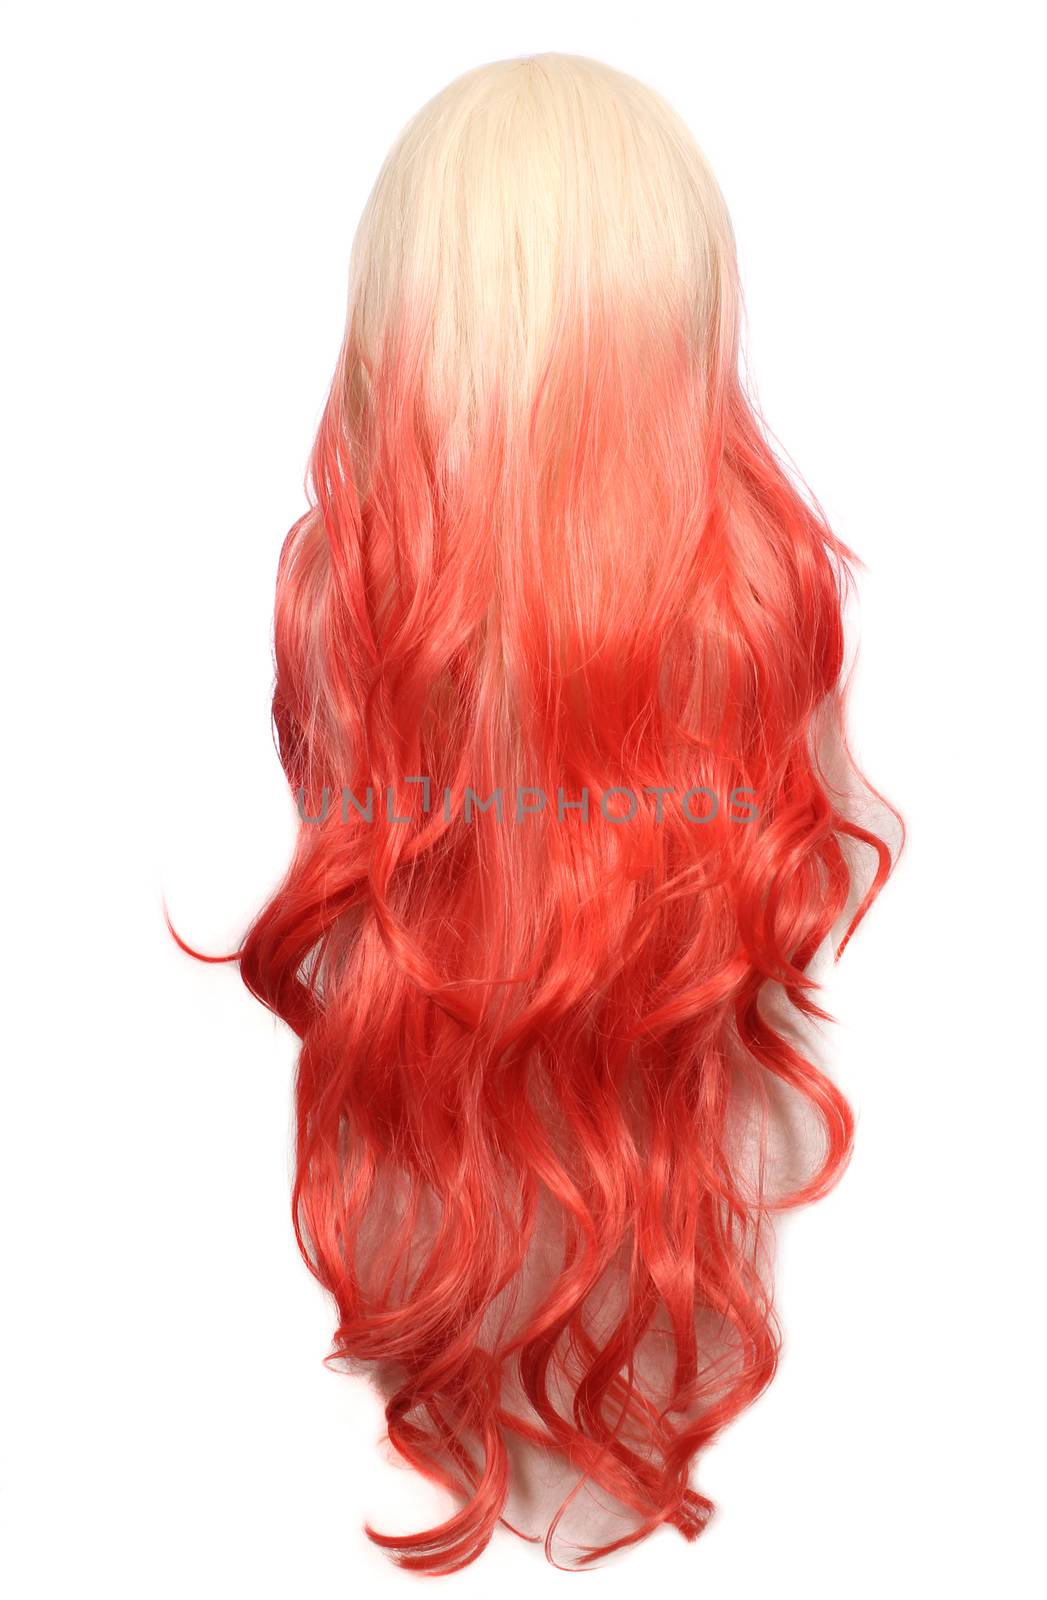 Blond and Orange Ombre Wig on Mannequin by Marti157900